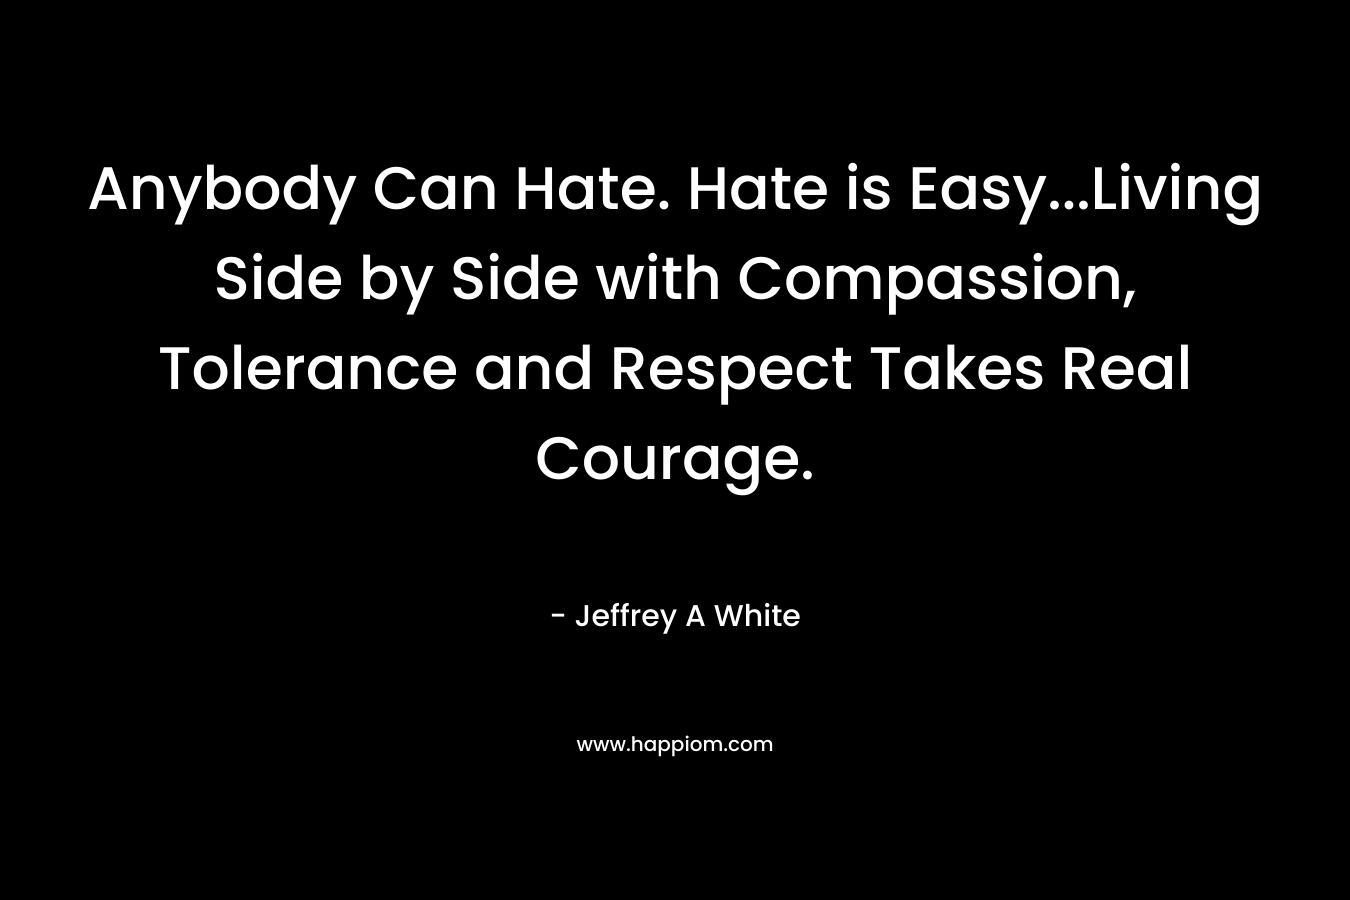 Anybody Can Hate. Hate is Easy...Living Side by Side with Compassion, Tolerance and Respect Takes Real Courage.